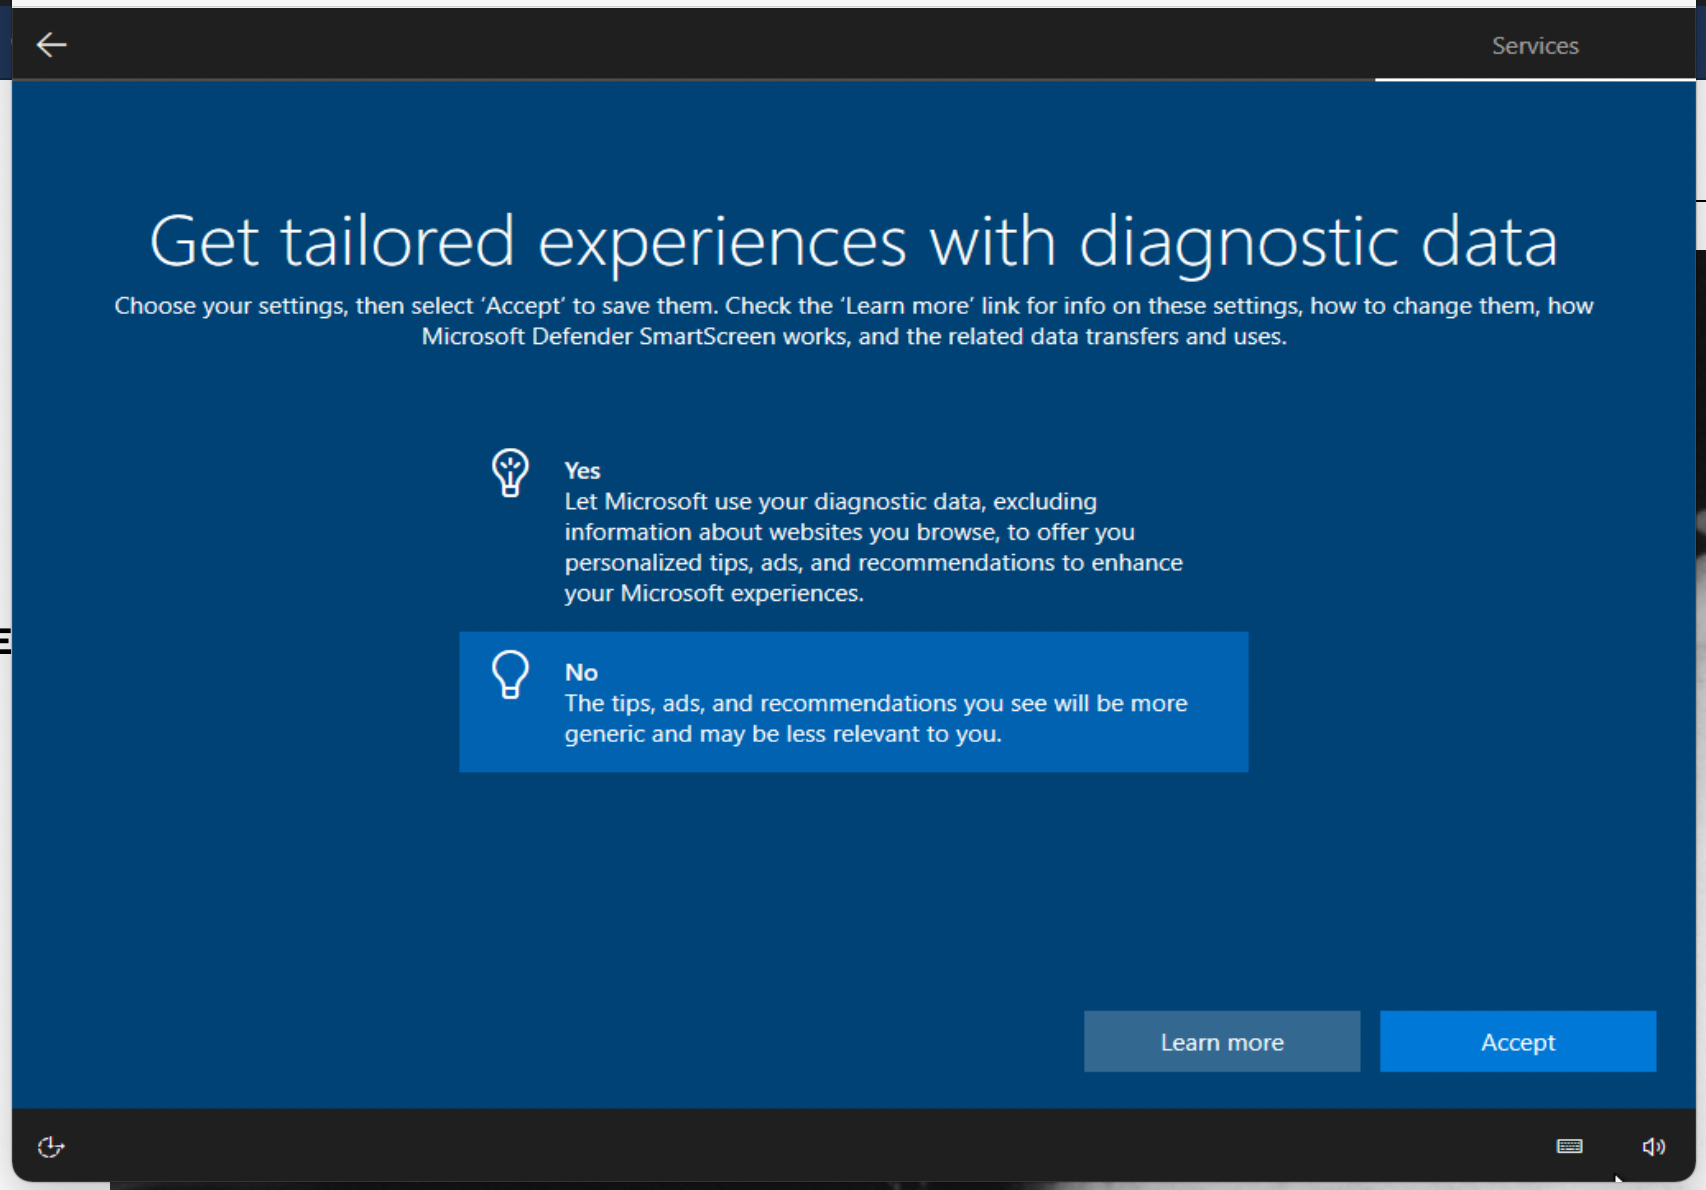 Get tailored experiences from Microsoft